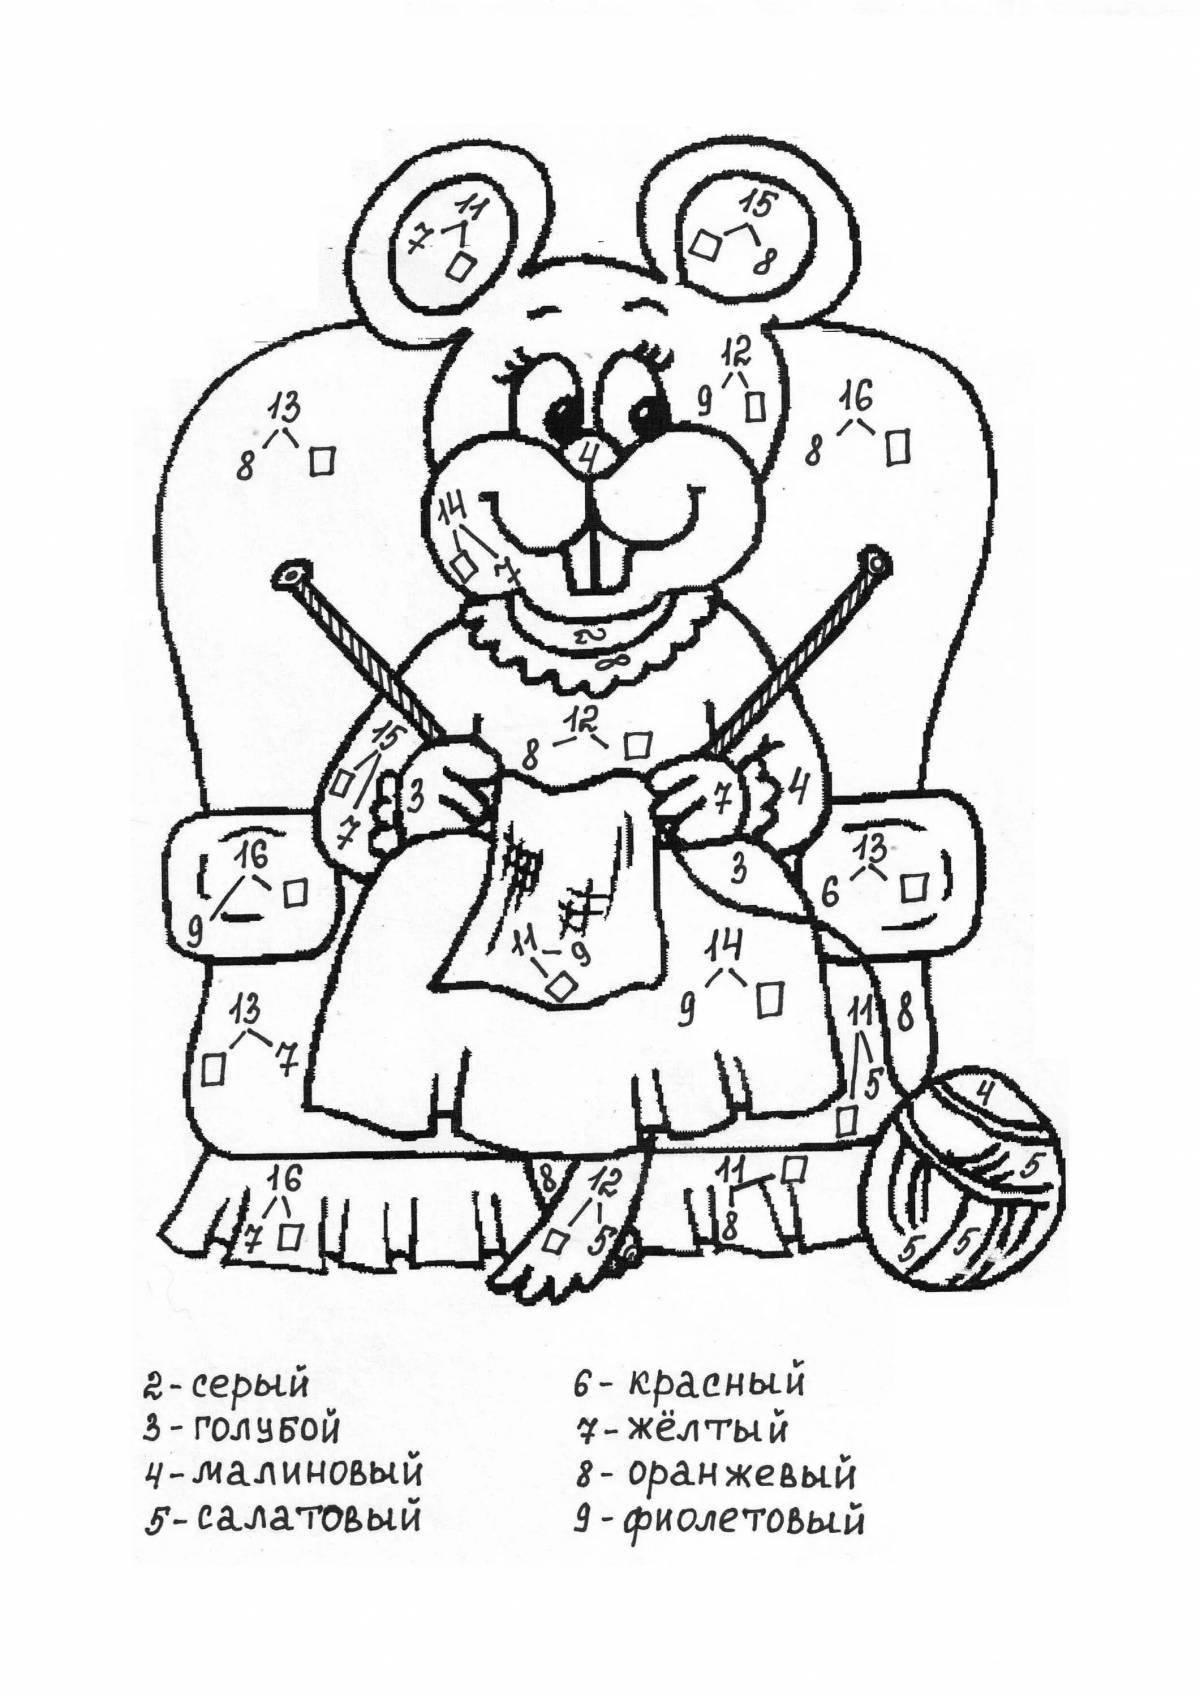 Examples of innovative coloring pages